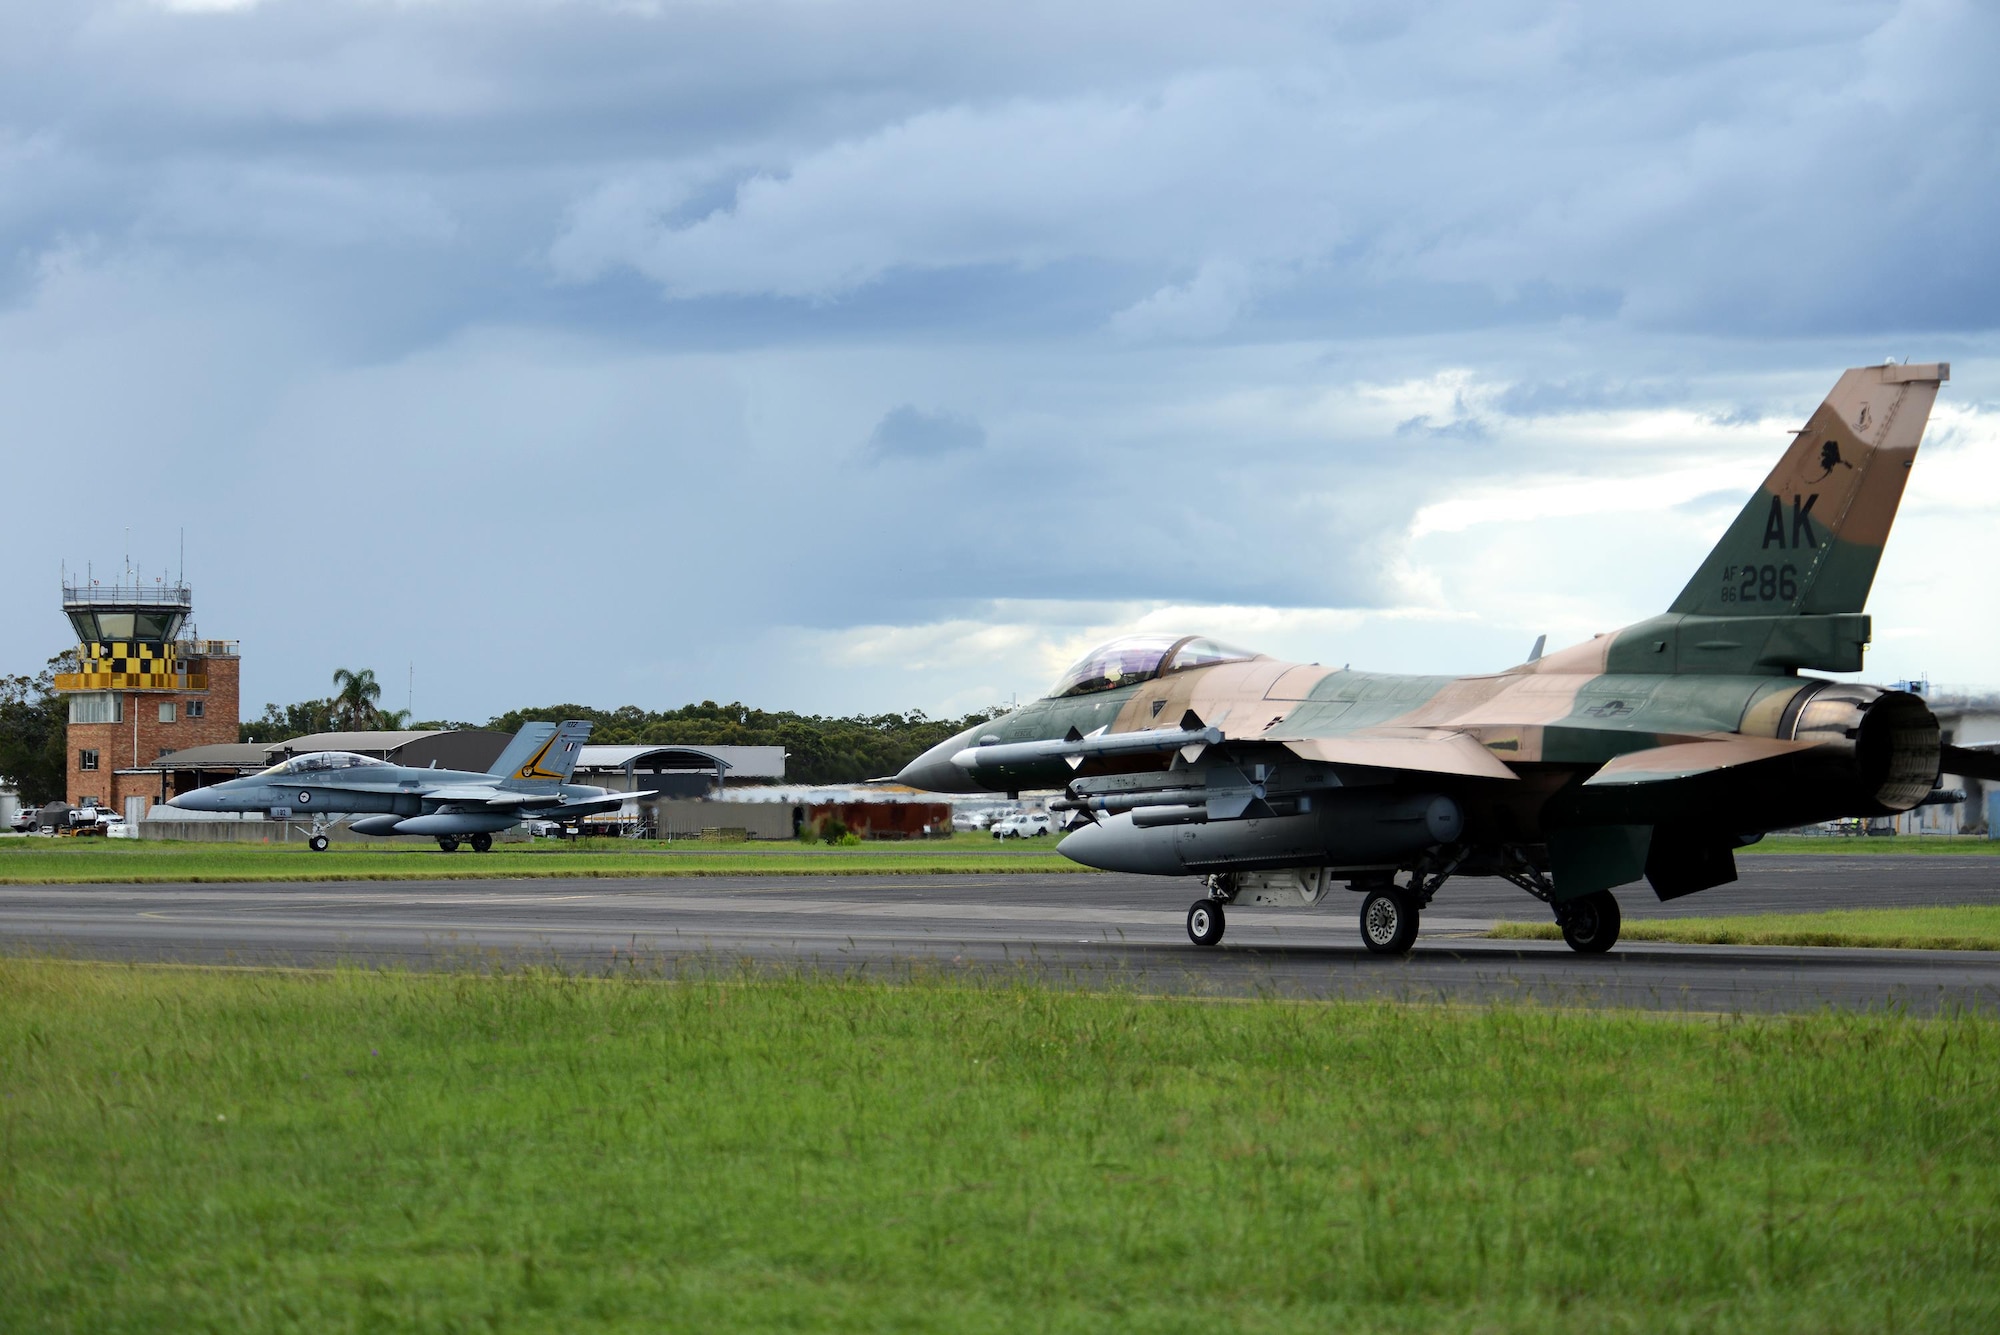 A U.S. Air Force F-16 Fighting Falcon and a Royal Australian Air Force F-18A Hornet taxi at RAAF Williamtown, during Exercise Diamond Shield 2017 in New South Wales, Australia, March 21, 2017. (U.S. Air Force photo by Tech. Sgt. Steven R. Doty)